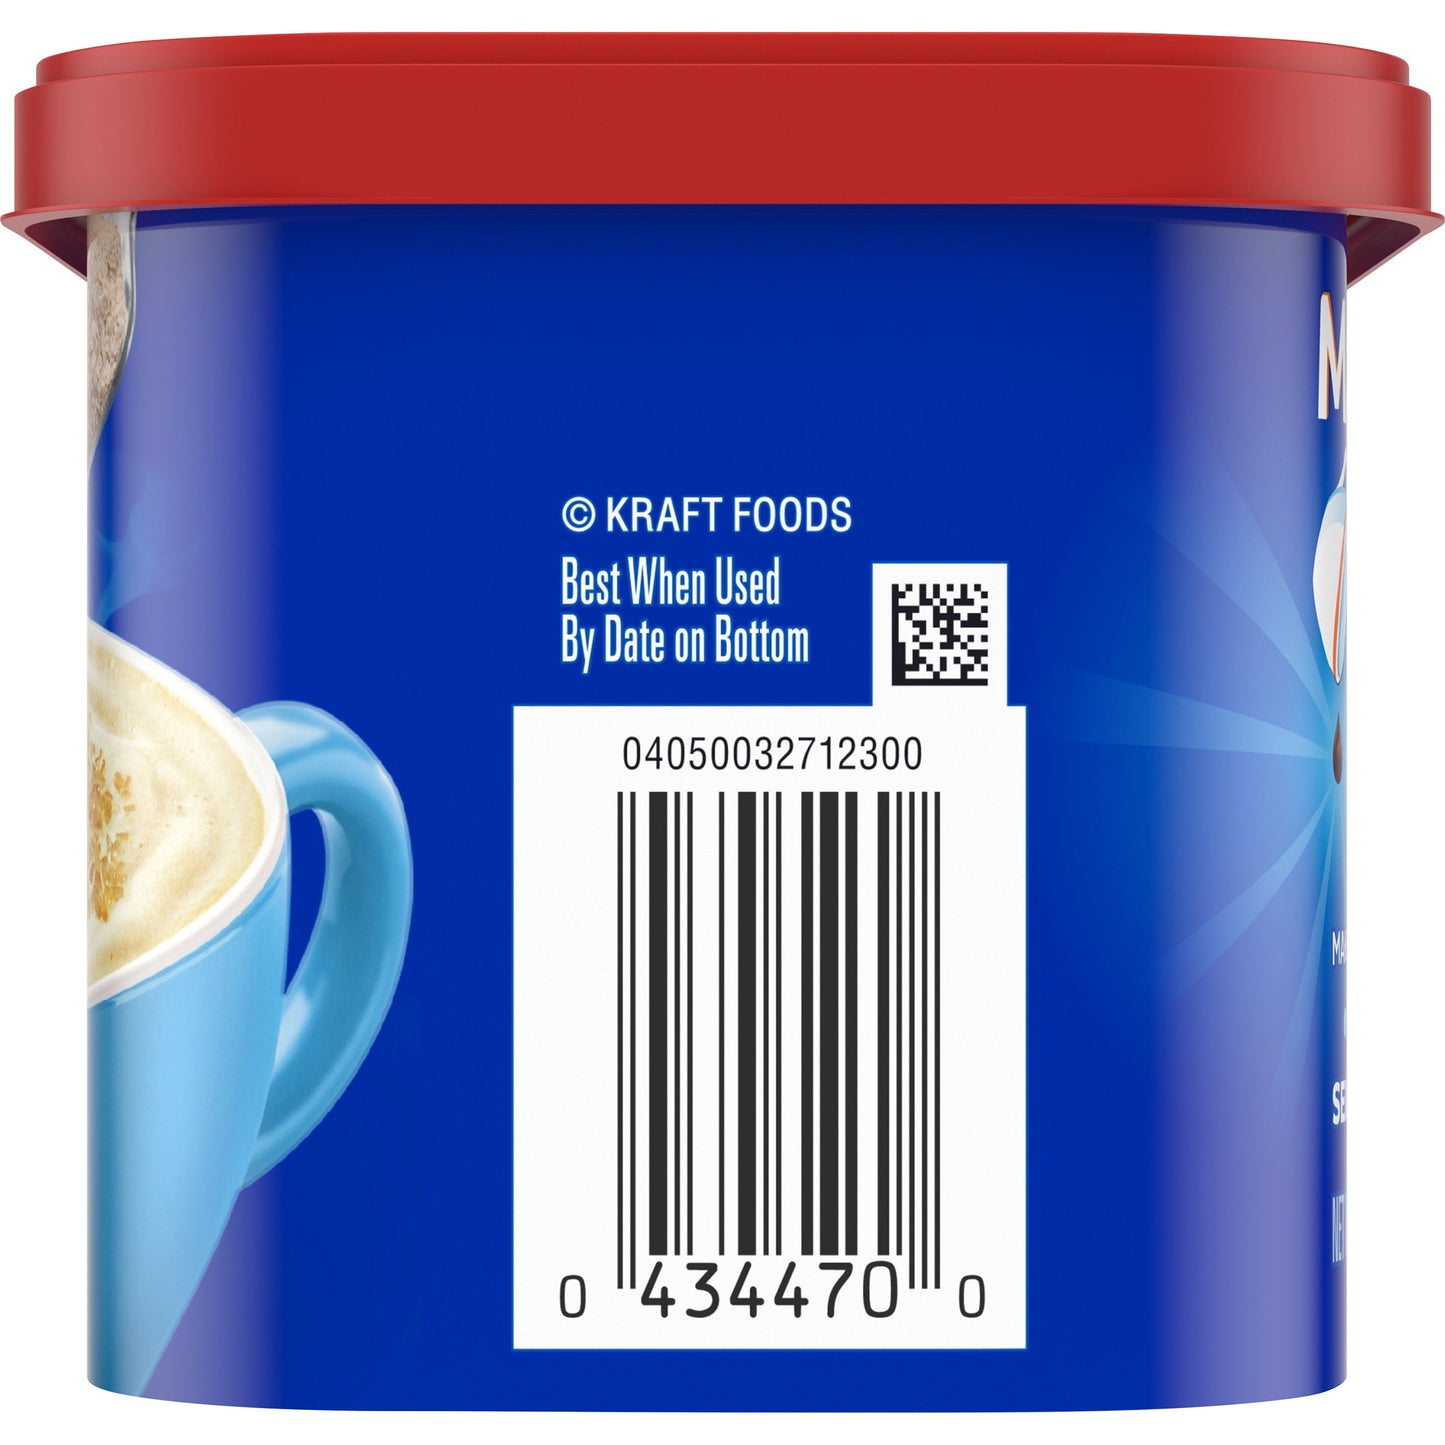 Maxwell House International Vanilla Bean Latte Café-Style Instant Coffee Beverage Mix, 8.5 oz. Canister